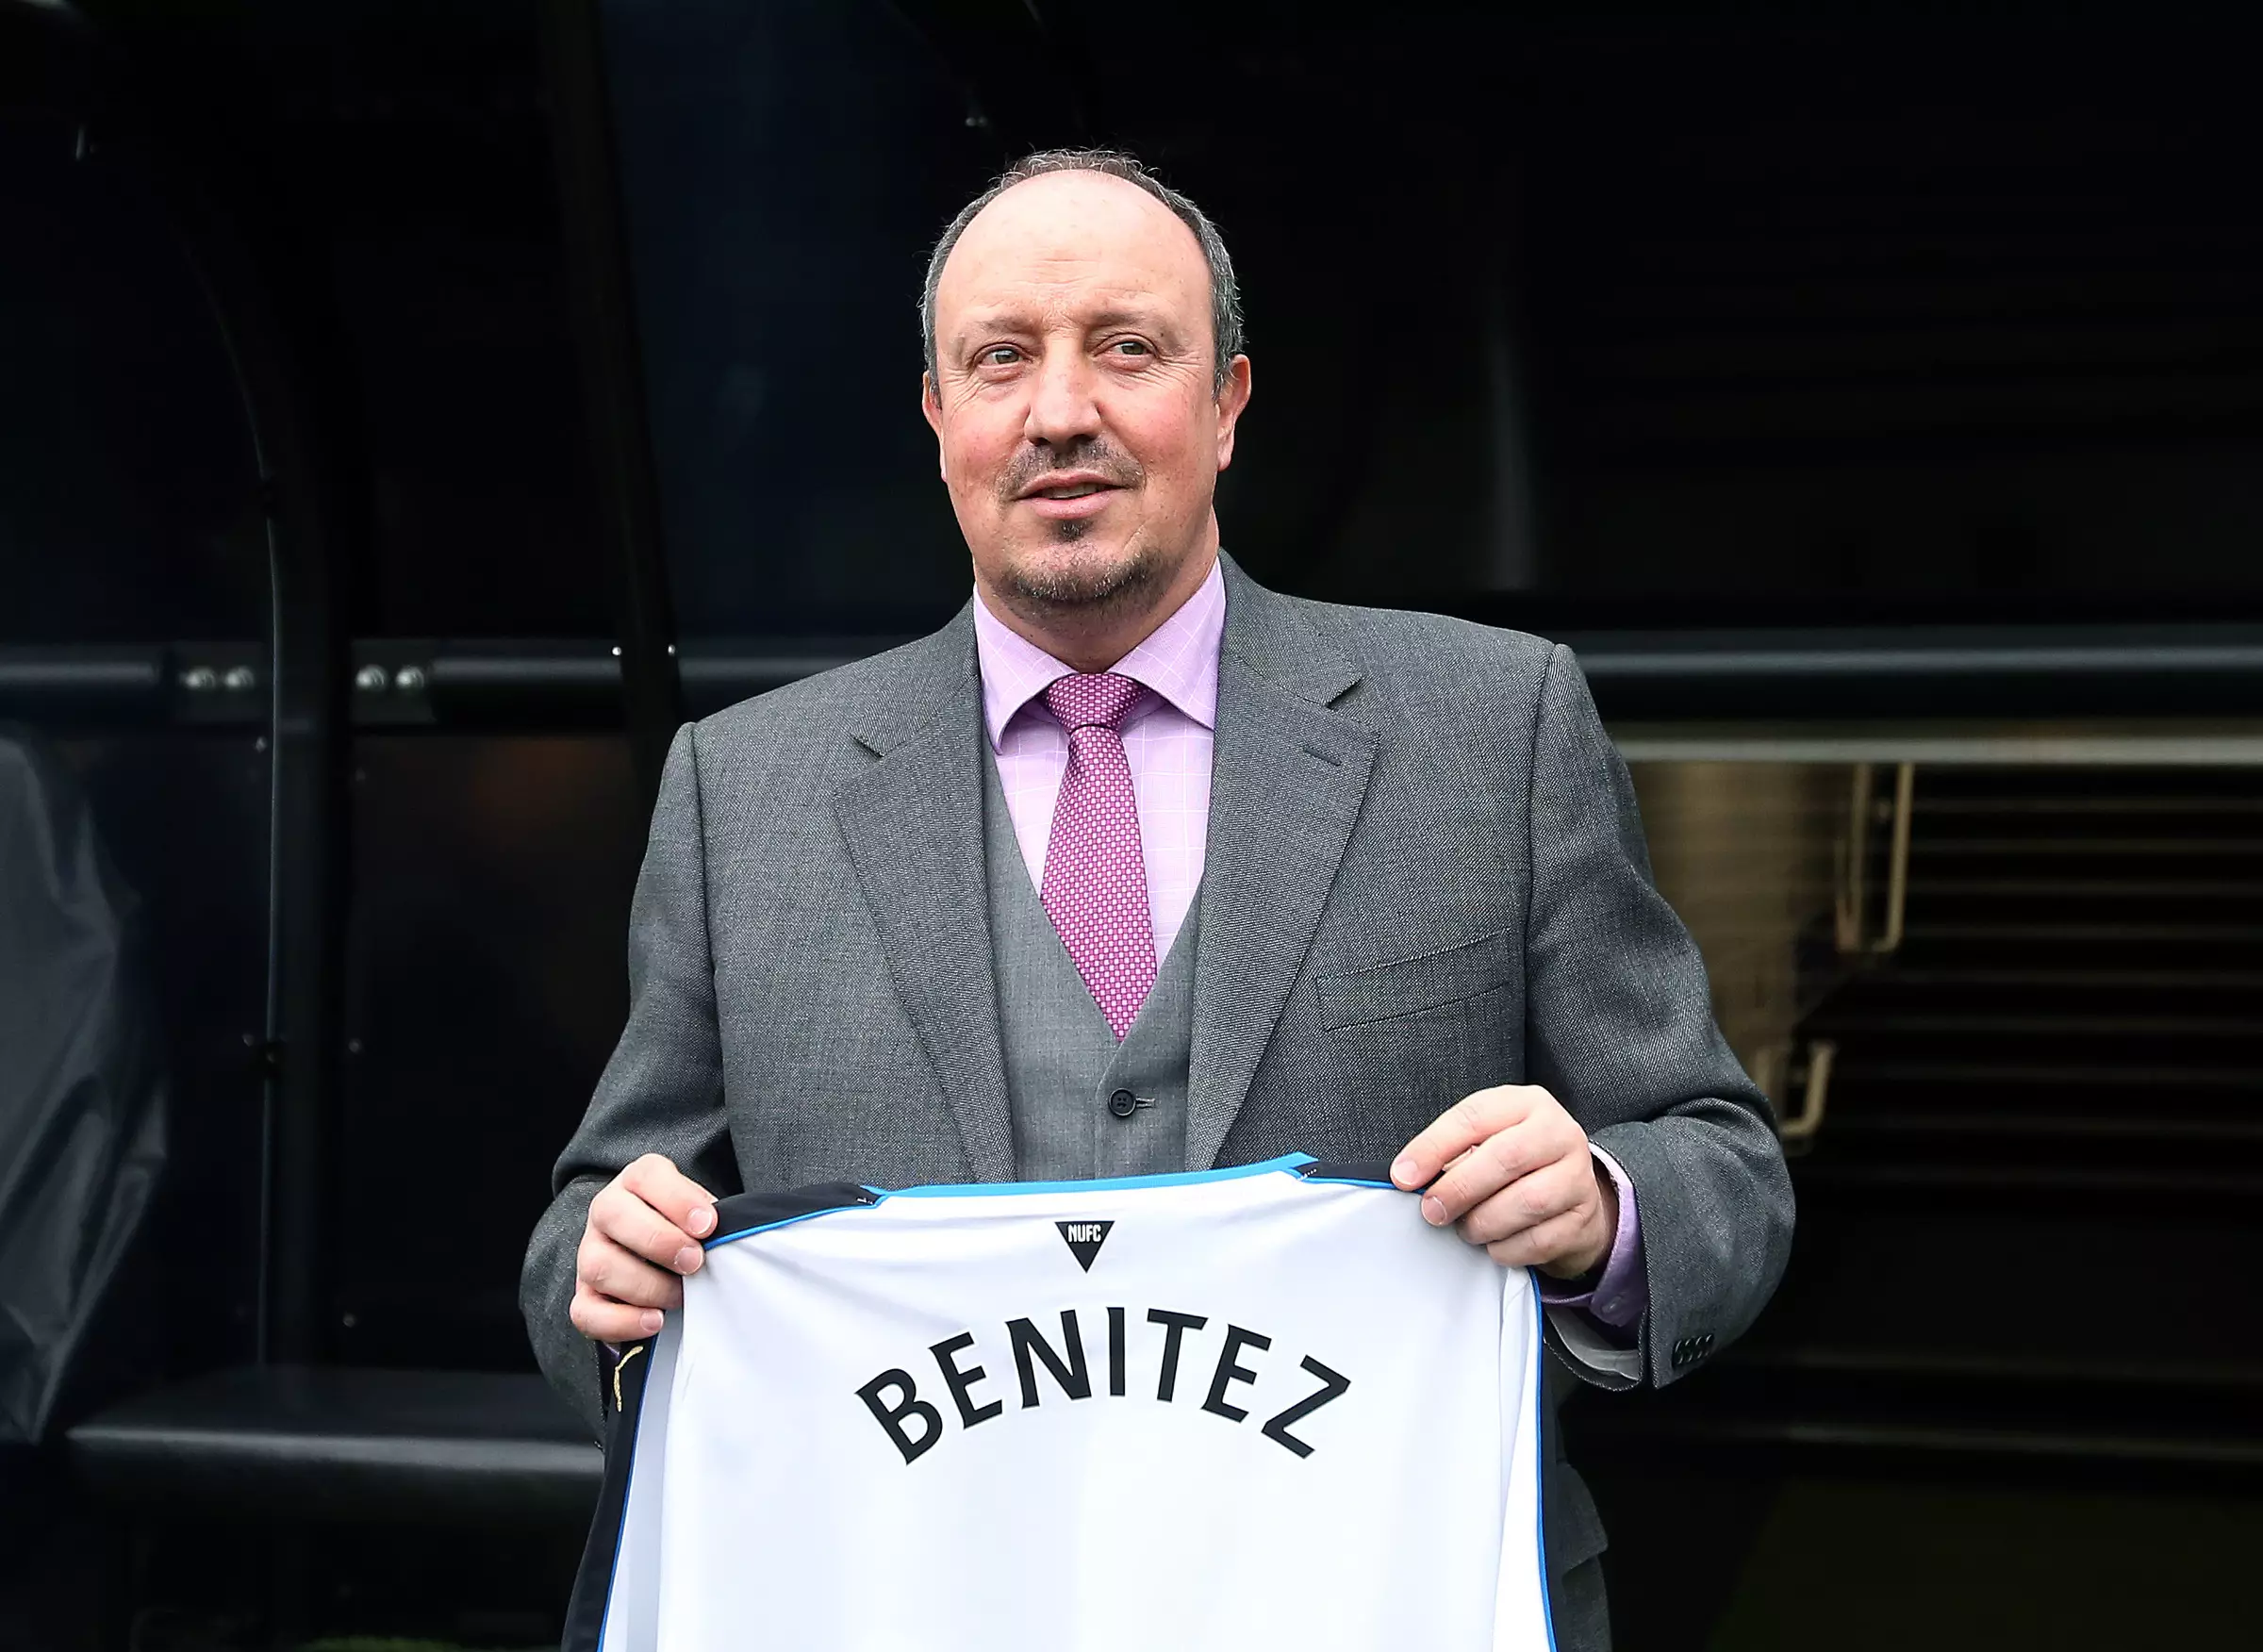 Benitez has done an excellent job with Newcastle on such a tight budget. Image: PA Images